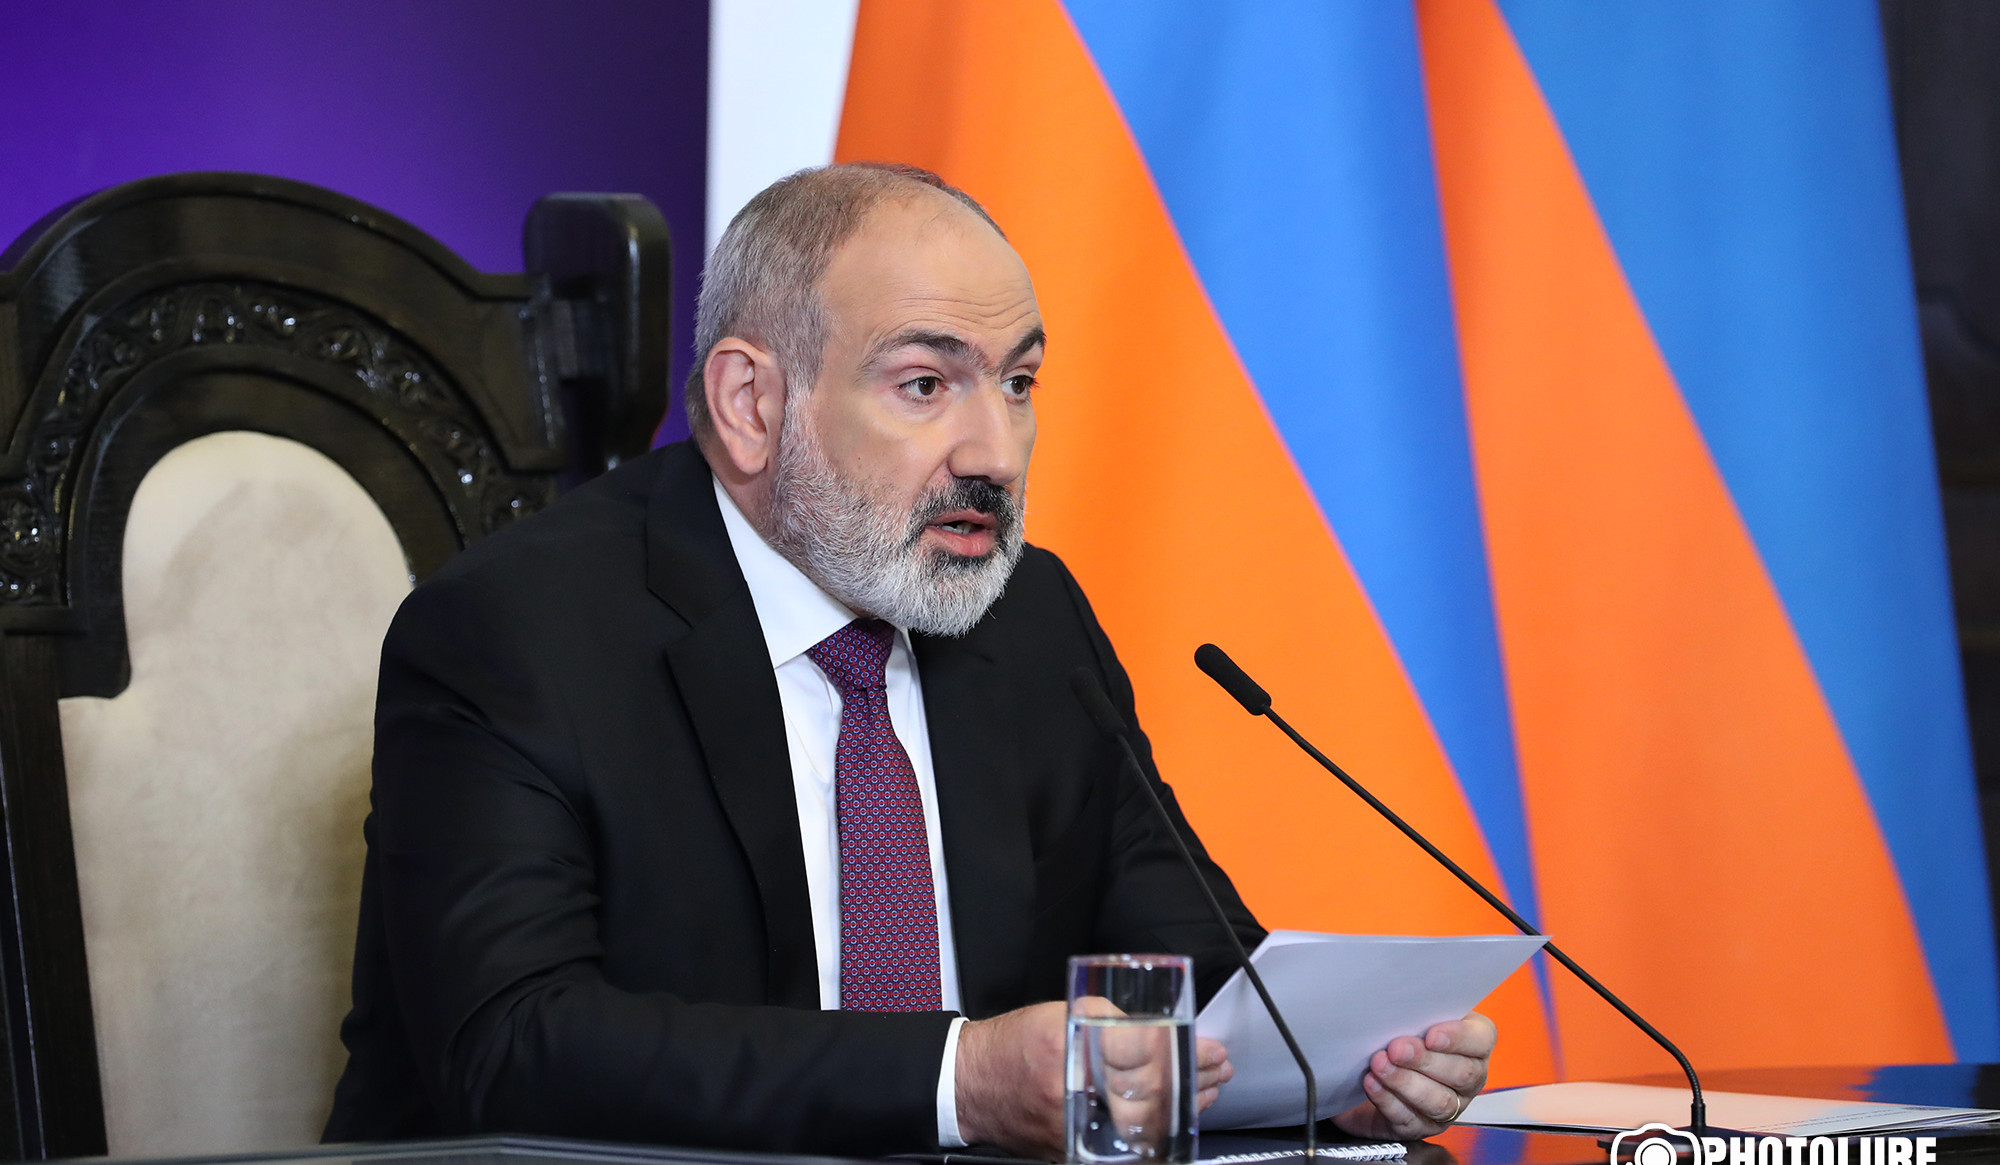 We hope to reach agreement on peace text as soon as possible and sign it: Pashinyan